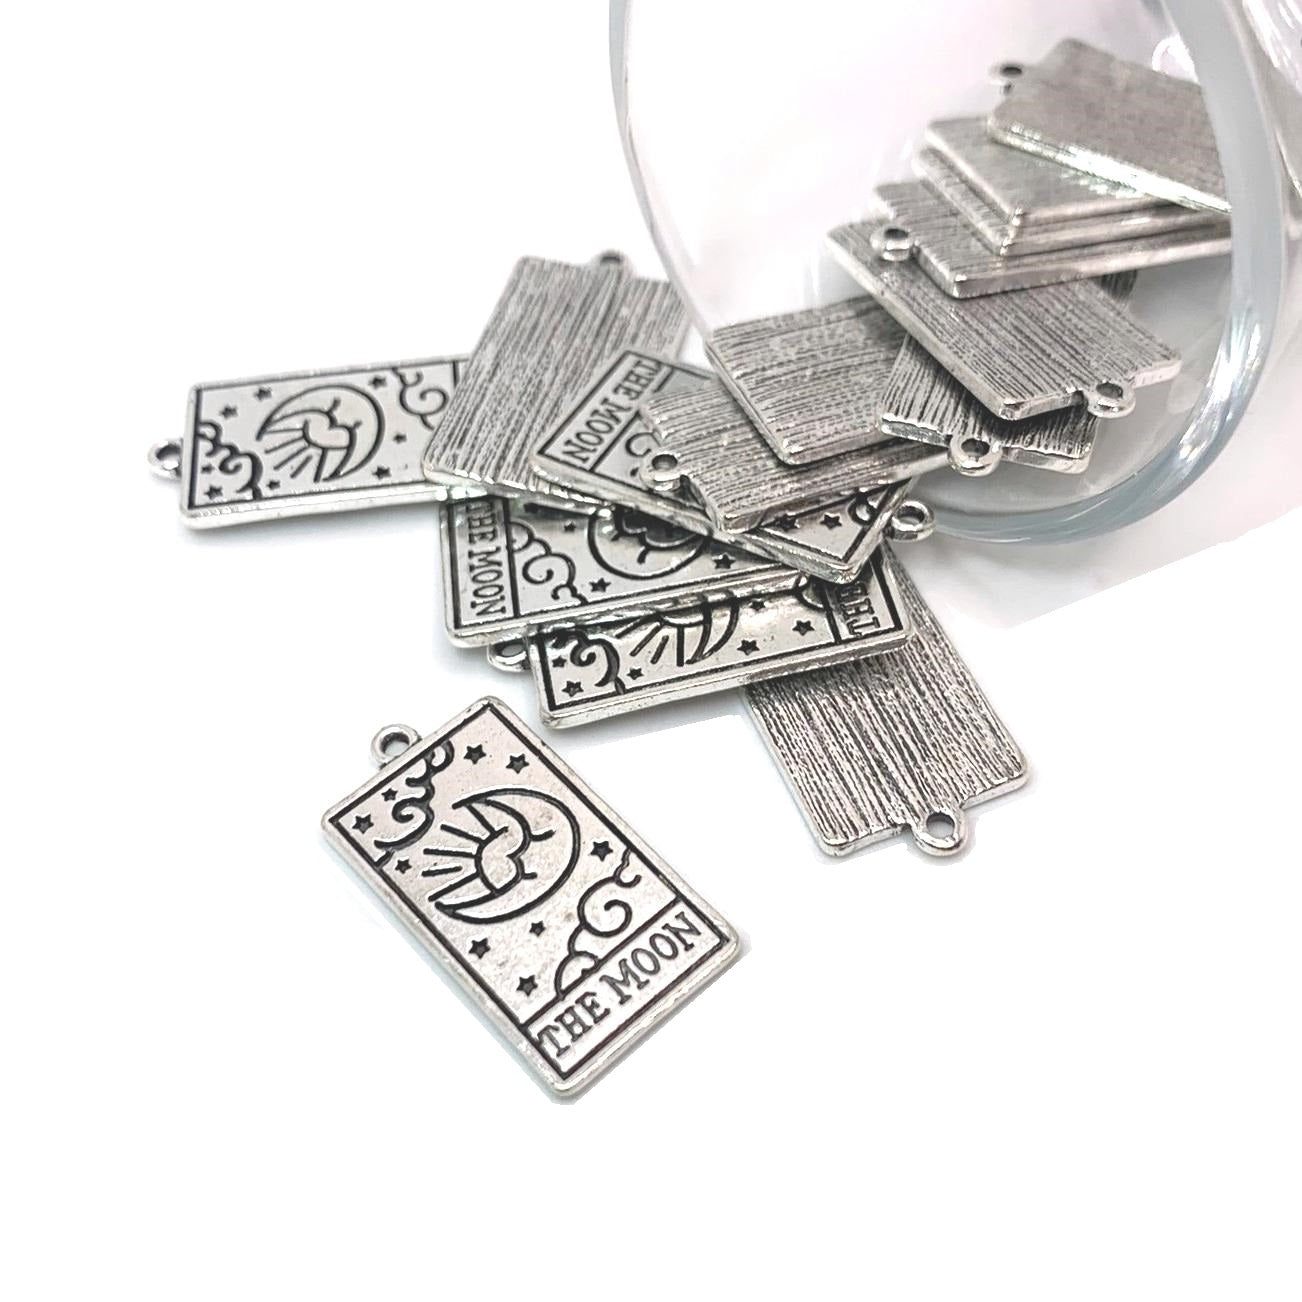 1, 4, 20 or 50 Pieces: The Moon Silver Tarot Card Fortune Teller Pendant